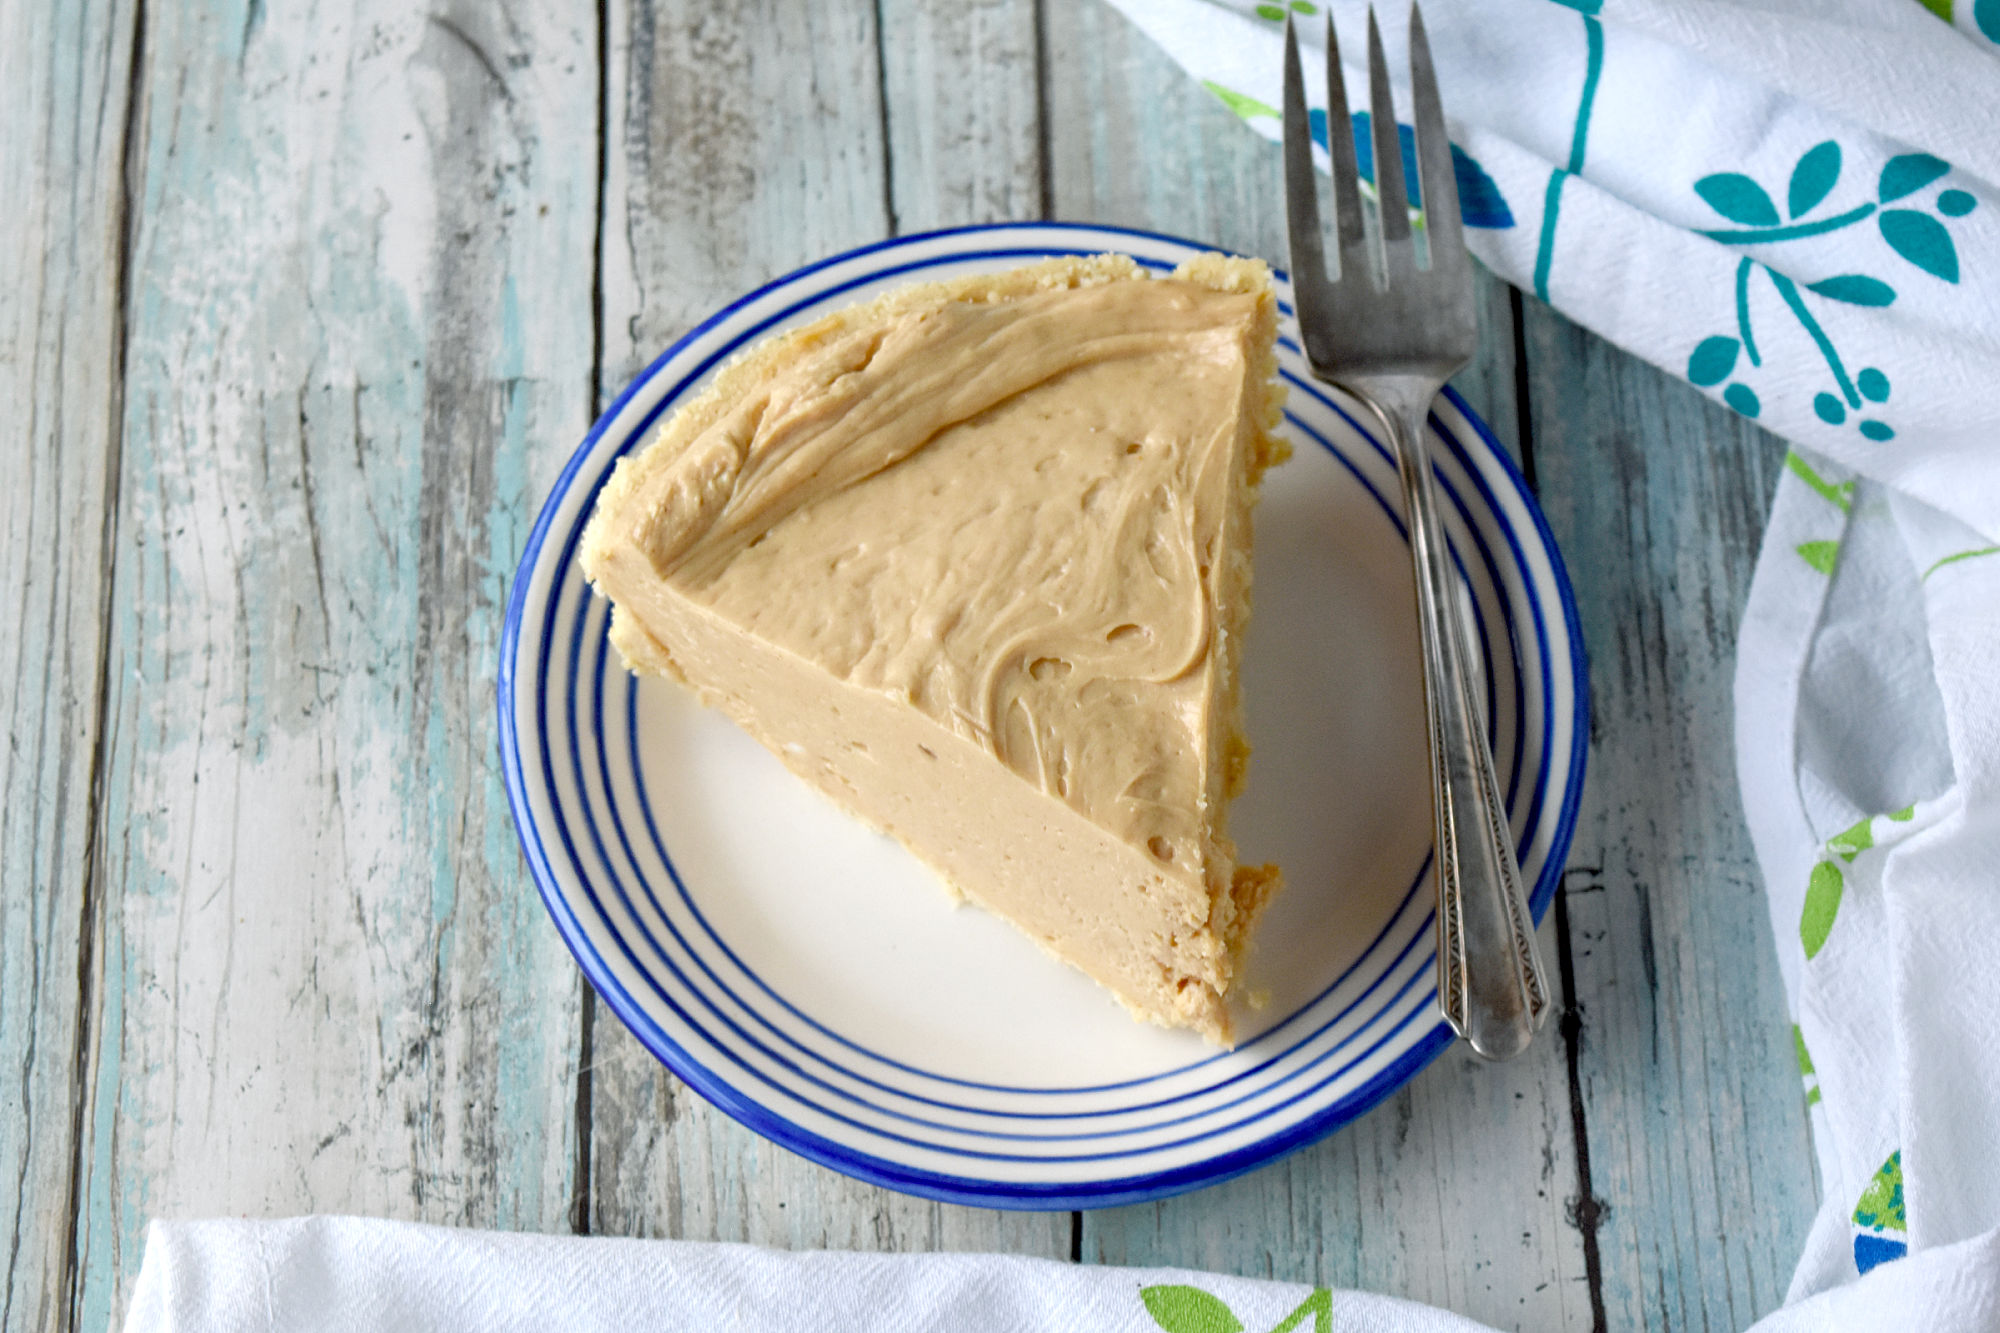 "Easy No Bake Peanut Butter Pie has 5 ingredients and whips up in under five minutes.  Perfect for a backyard party or barbecue.  Or just because you want some peanut butter pie.  #OurFamilyTable #peanutbutterpie #nobakepie #peanutbutter #nobakedessert